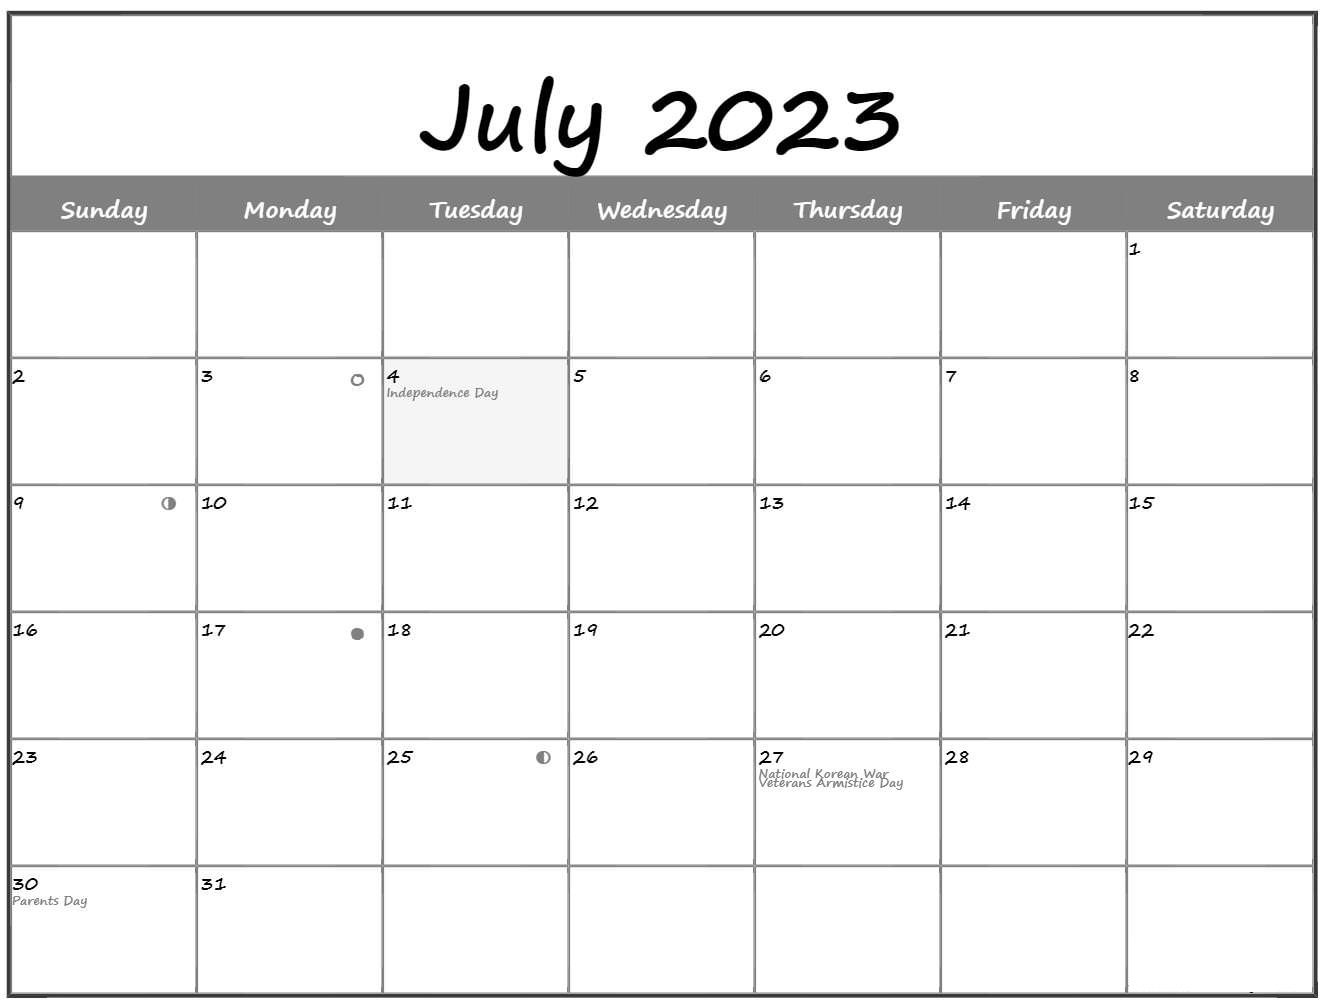 July 2023 Calendar With Moon Phases